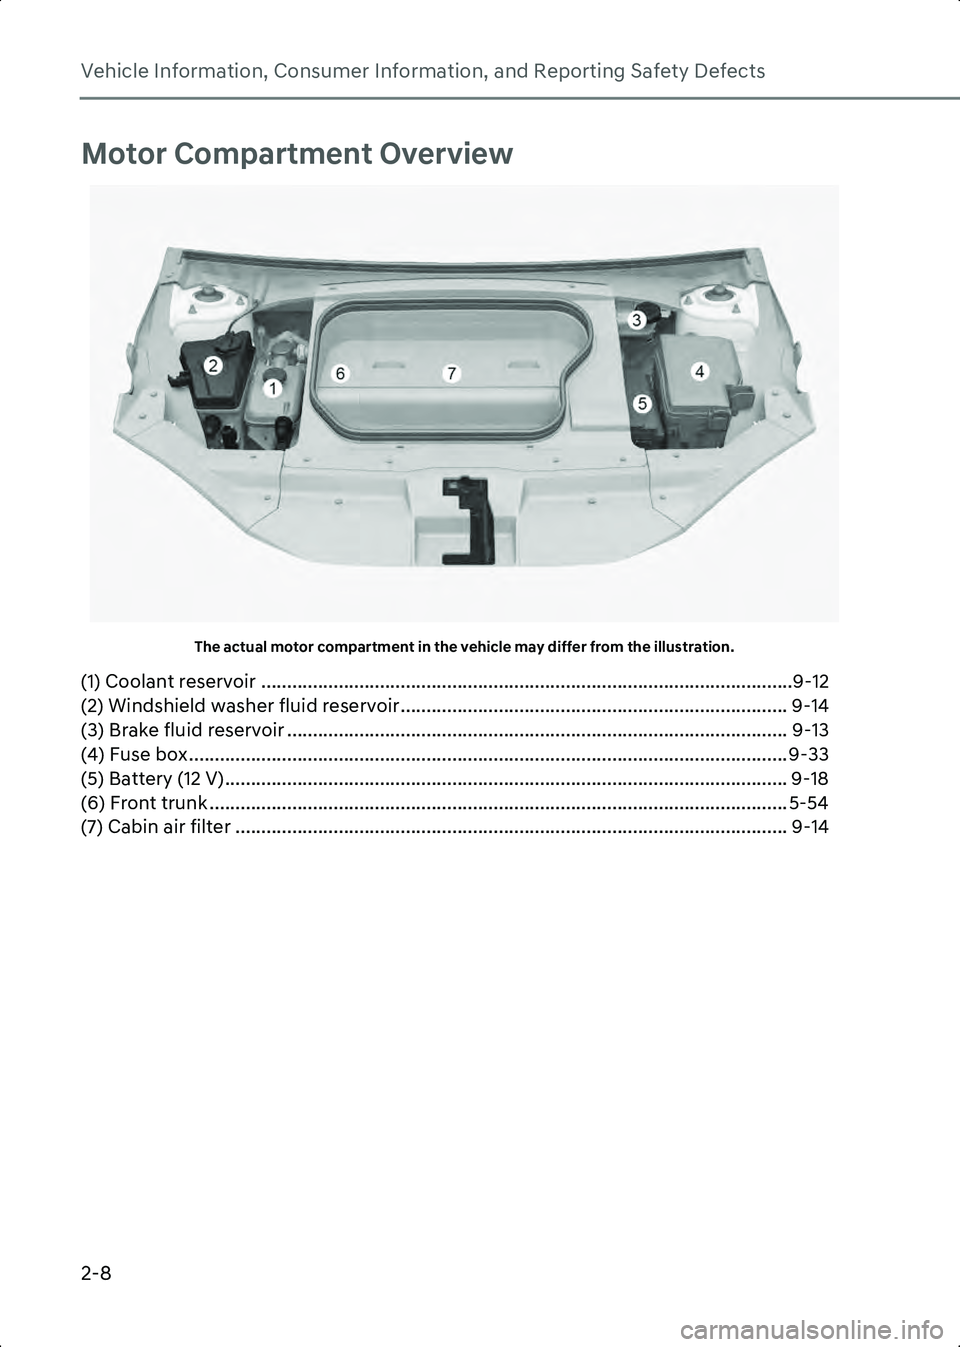 HYUNDAI IONIQ 6 2023  Owners Manual Vehicle Information, Consumer Information, and Reporting Safety Defects
2-8
Motor Compartment Overview
A1000901The actual motor compartment in the vehicle may differ from the illustration.
(1) Coolant